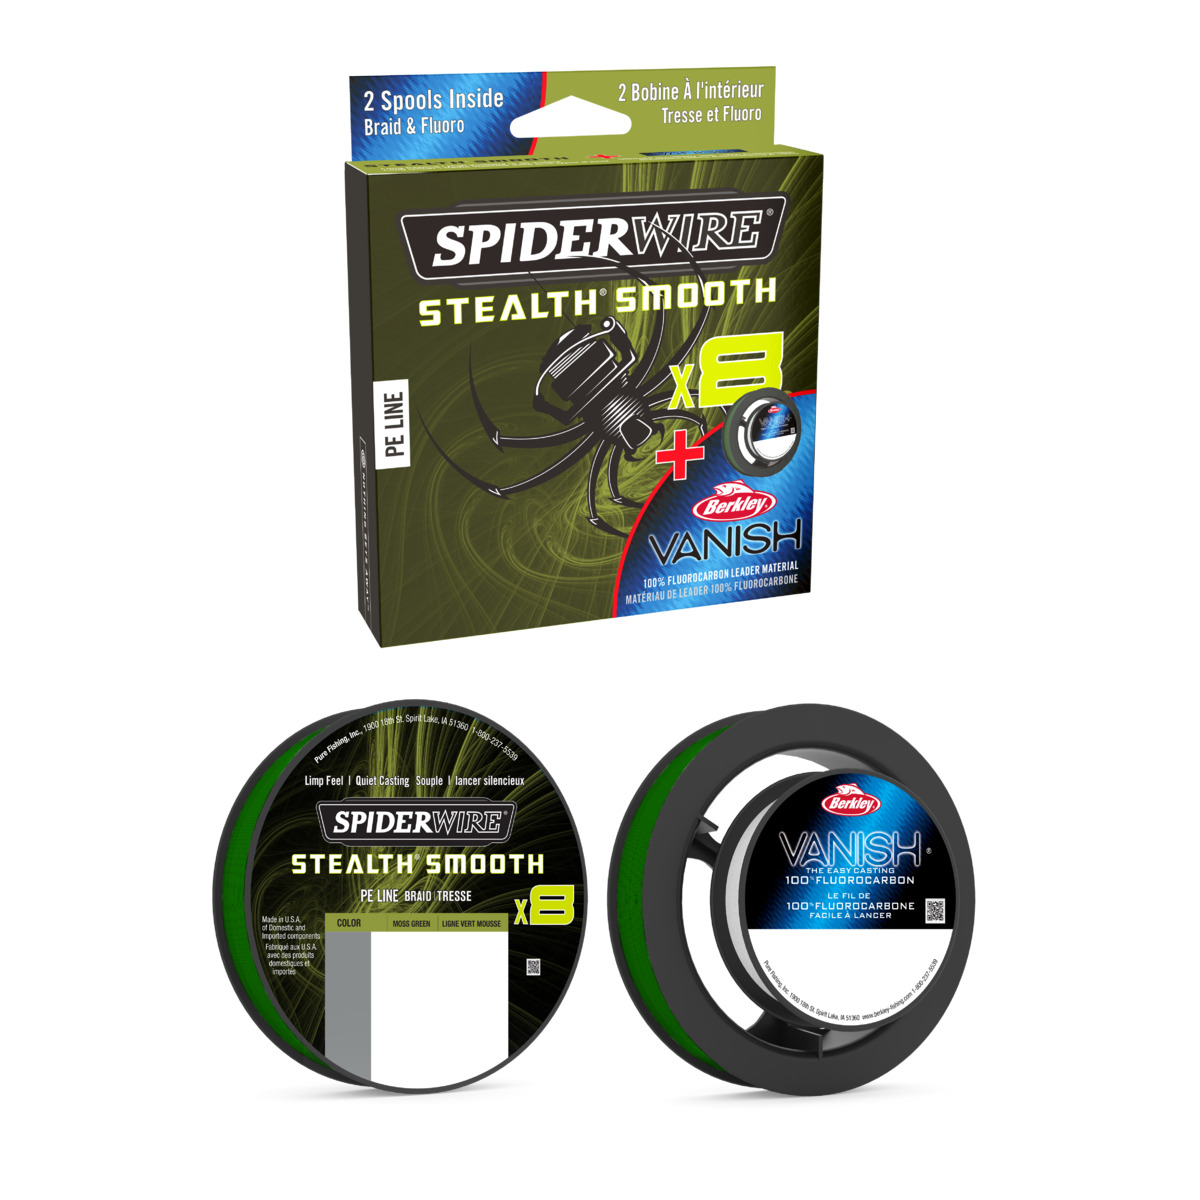 Spiderwire 8 Braid And Fluorocarbon Duo Spool System - 150 m msgrn/Vanish 40 m 0.15/0.40 mm